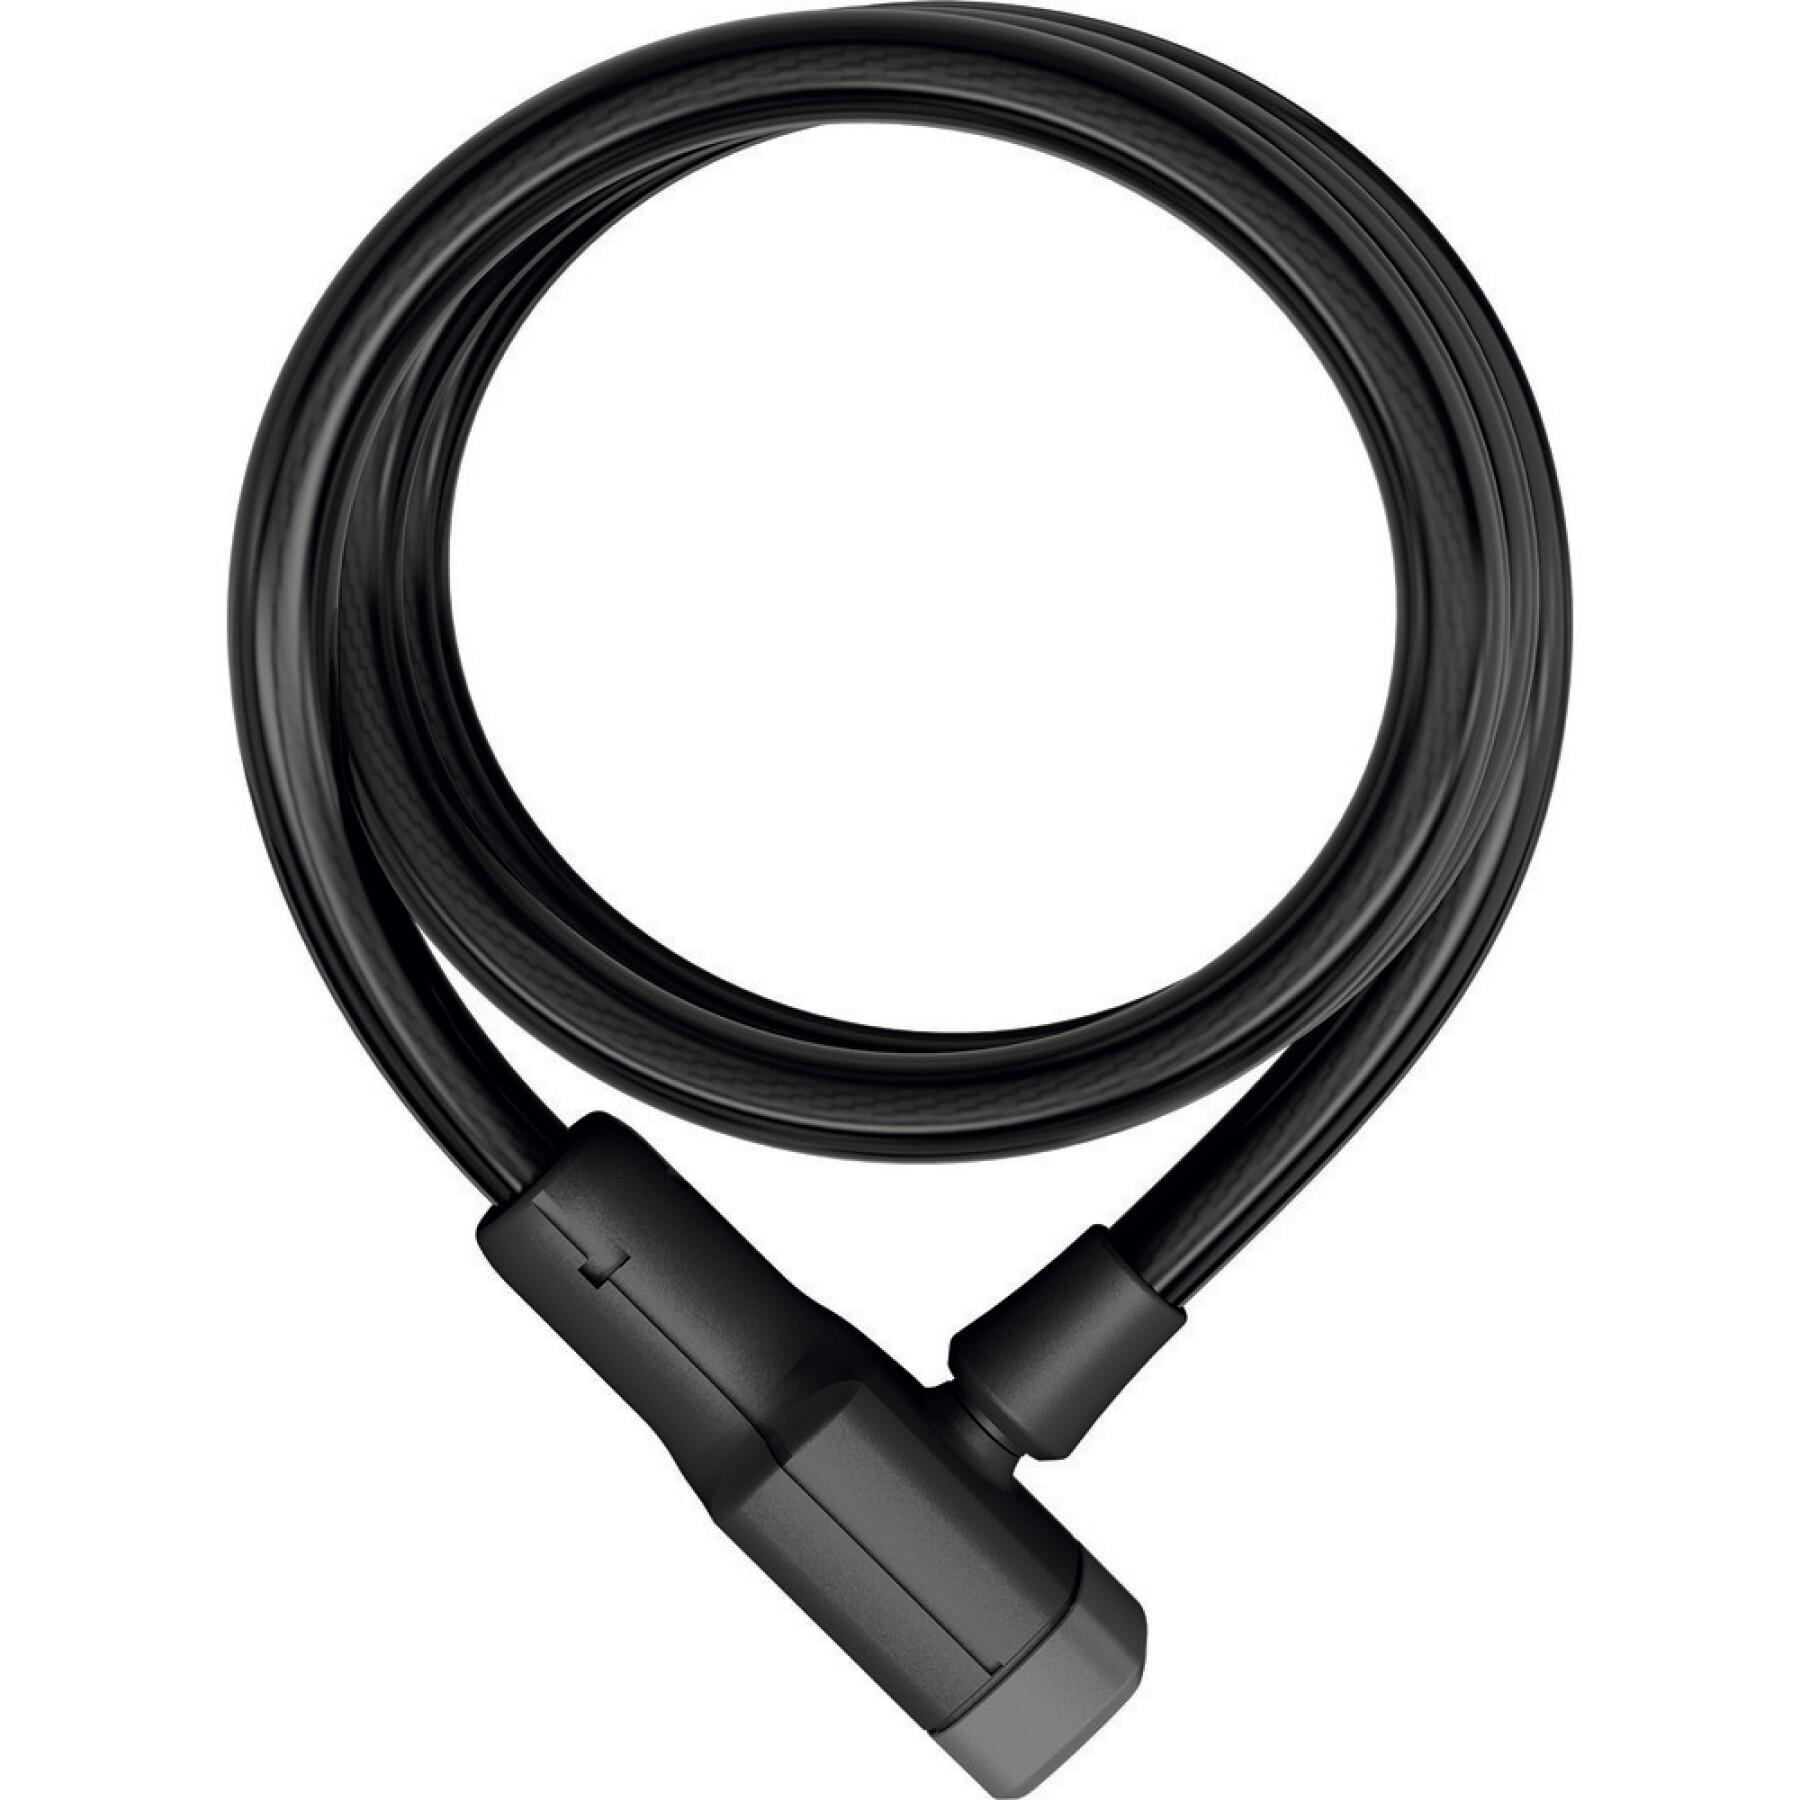 Anti-theft cable Abus 6412K/120 SCLL